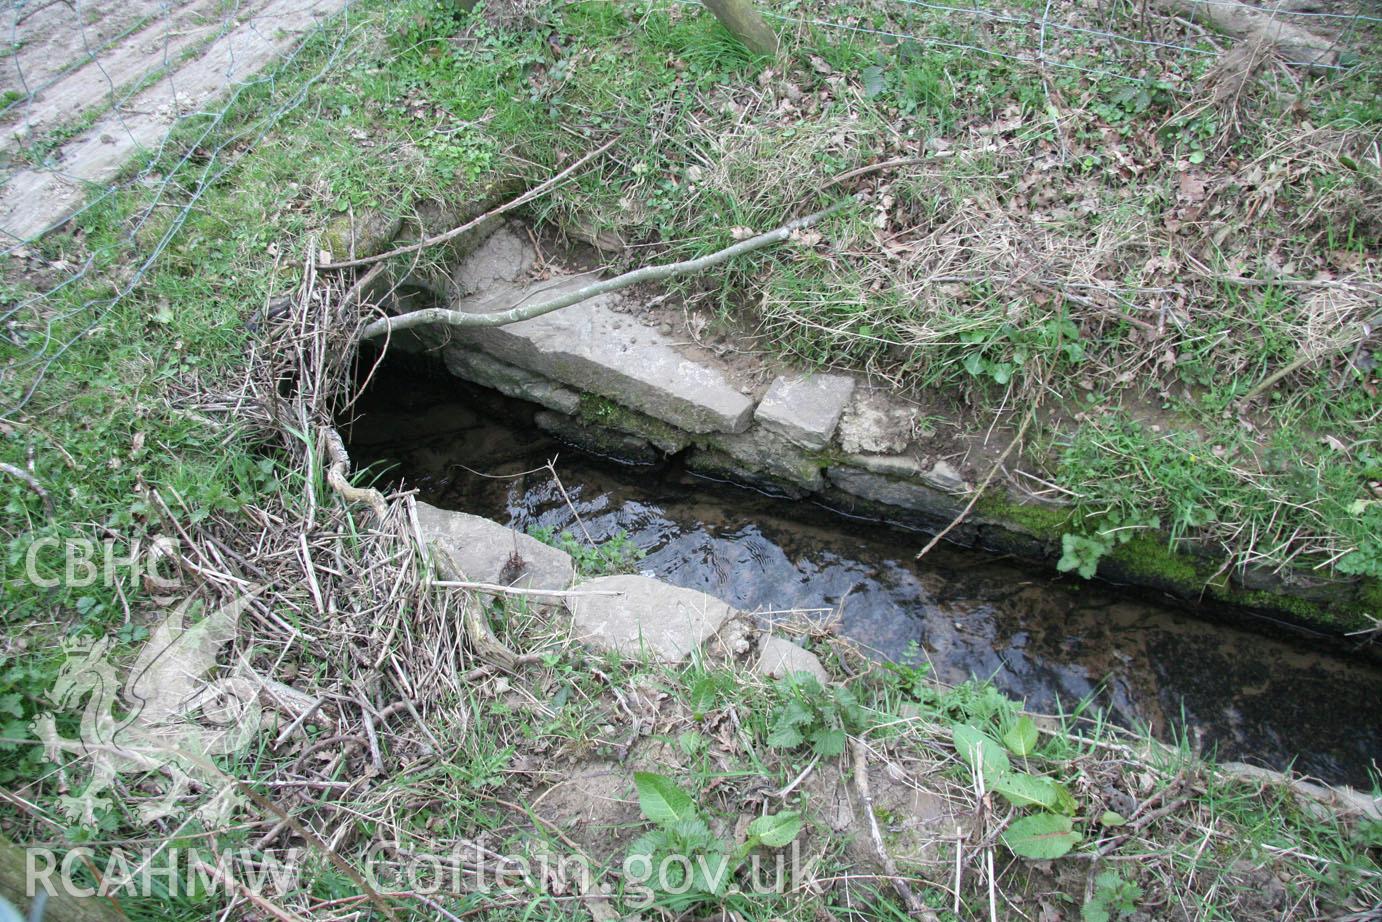 'Stone-lined channel running under western end of bridge (looking south).' Photographed during site visit to land south of school lane, Penperlleni. Part of Archaeological Desk Based Assessment conducted by Iestyn Jones of Archaeology Wales, 2014.